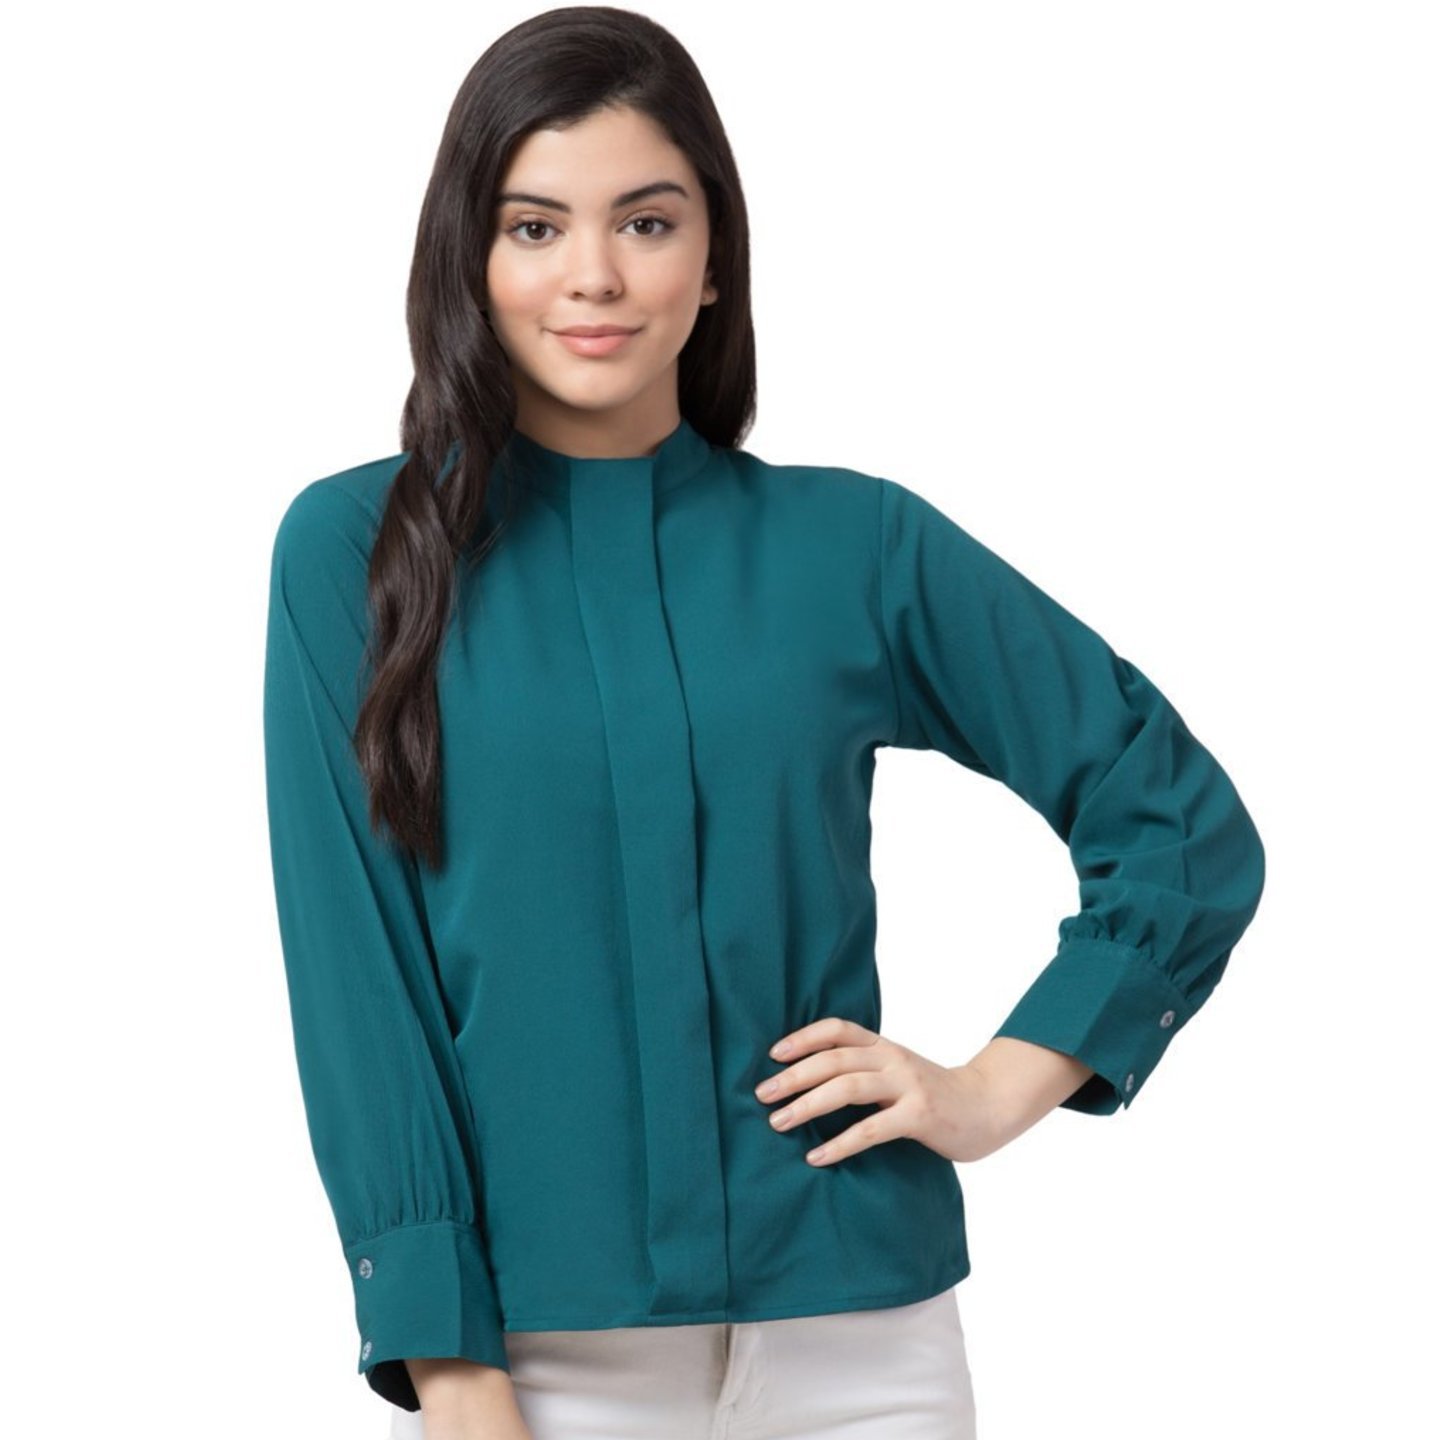 Paretto Green Full Sleeves Top for Women